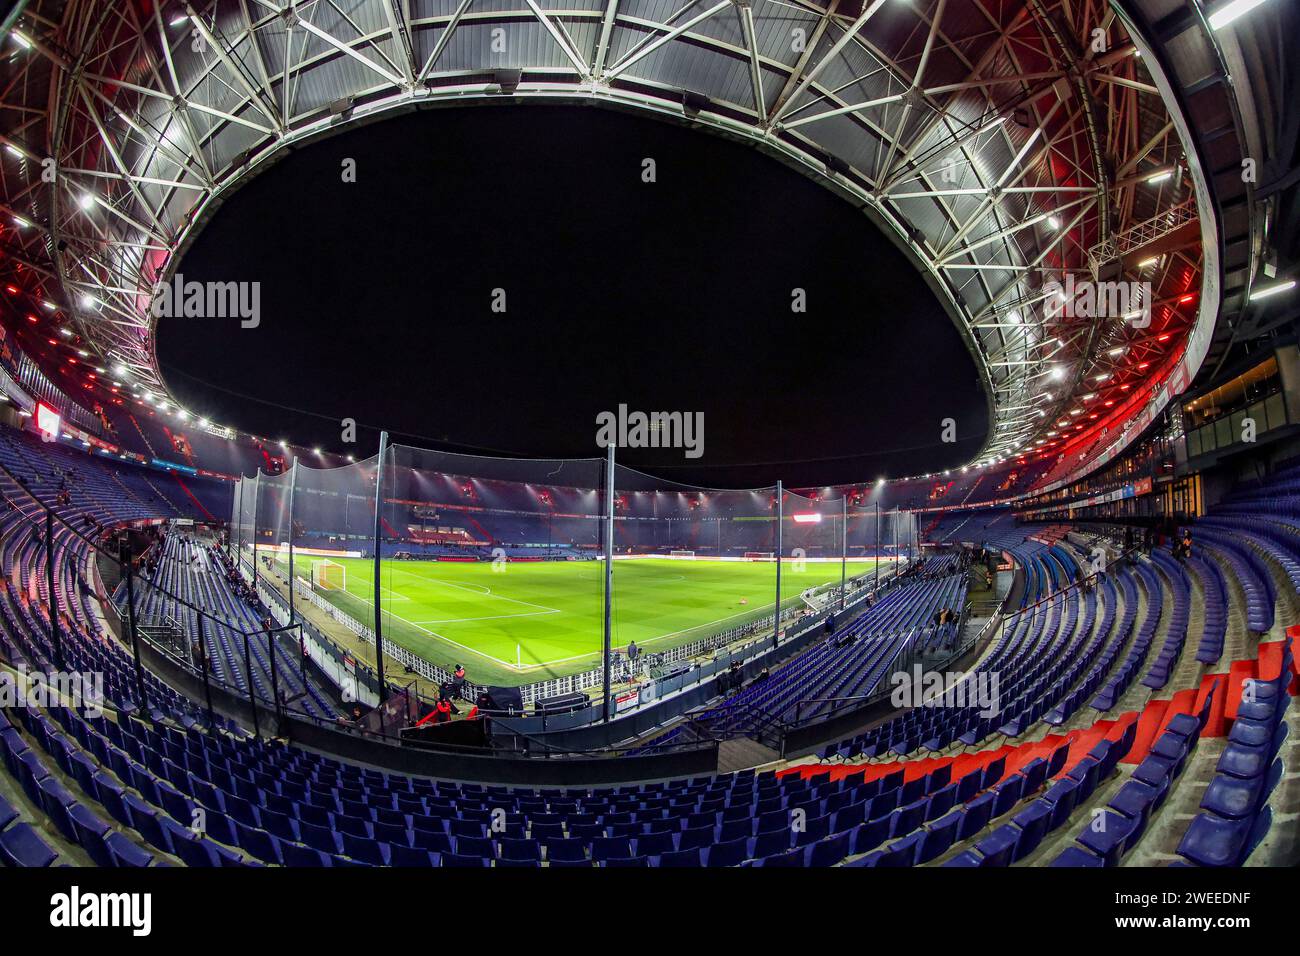 ROTTERDAM, NETHERLANDS - JANUARY 24: stadium overview inside during the Eredivisie match of SC Feyenoord and PSV Eindhoven at de Kuip on January 24, 2 Stock Photo